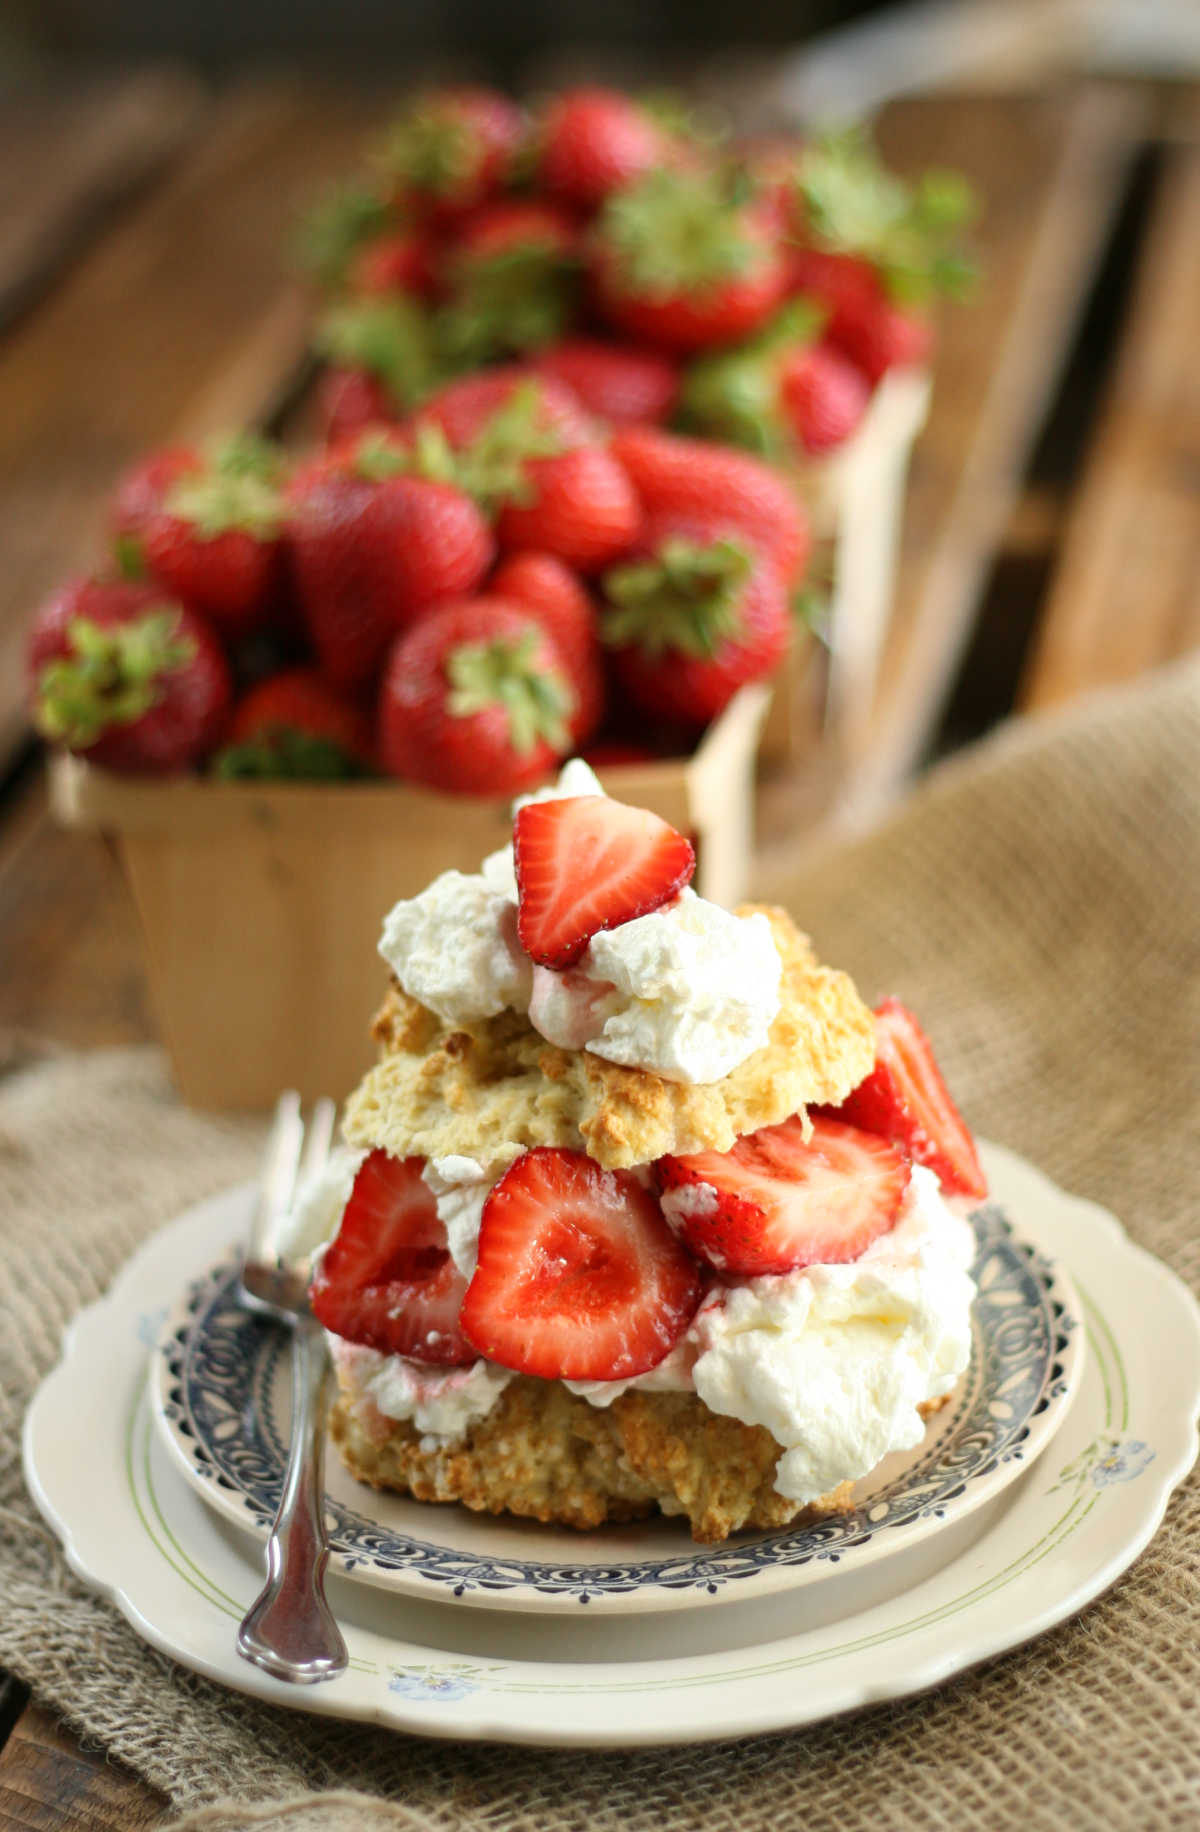 Strawberry shortcake biscuits, fresh strawberries, whipped cream on small white plate.